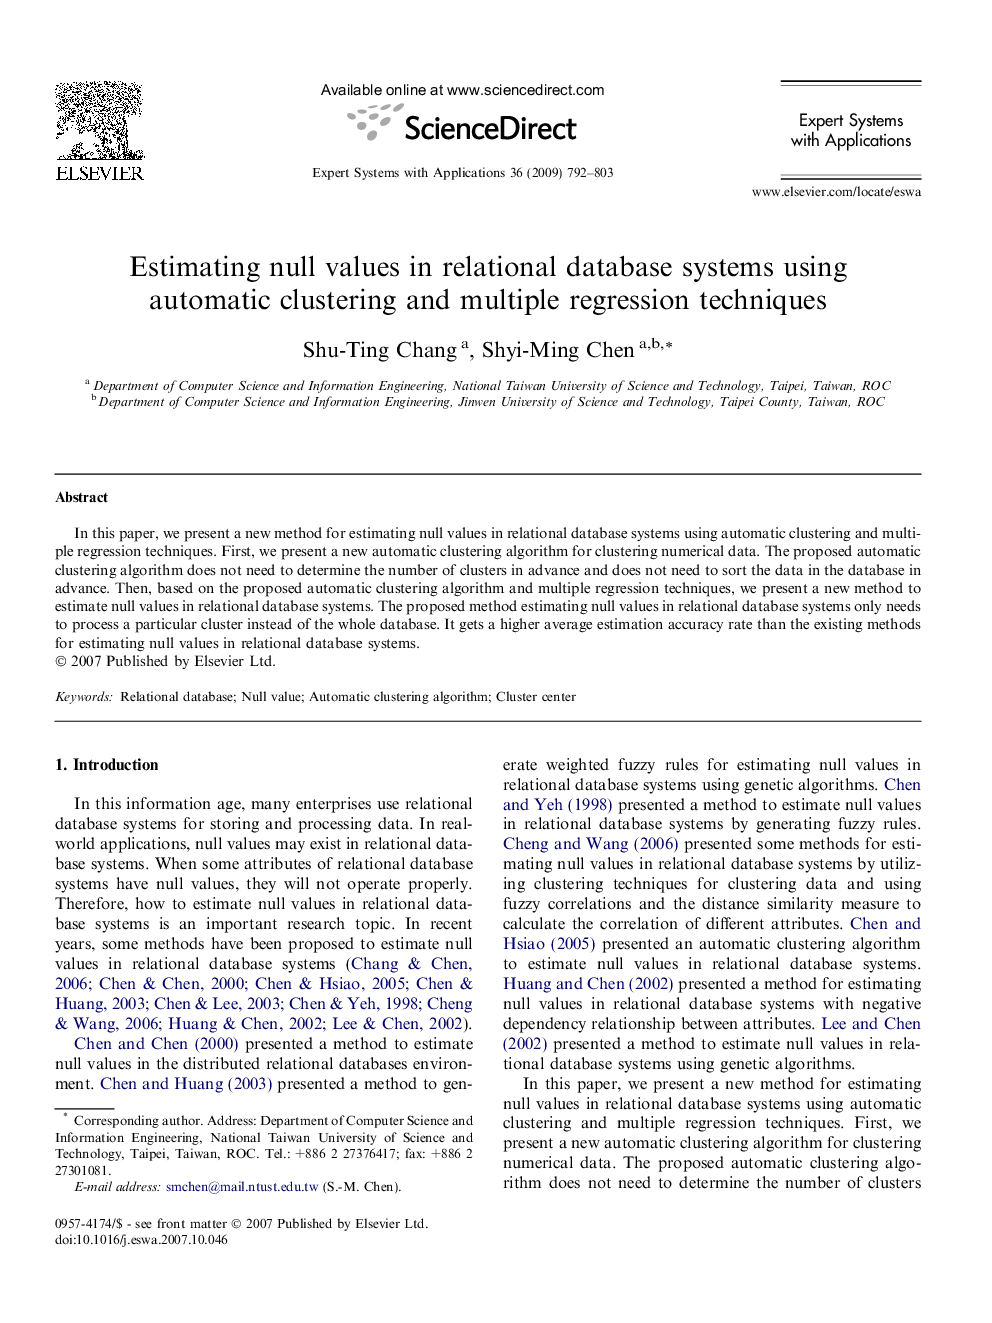 Estimating null values in relational database systems using automatic clustering and multiple regression techniques